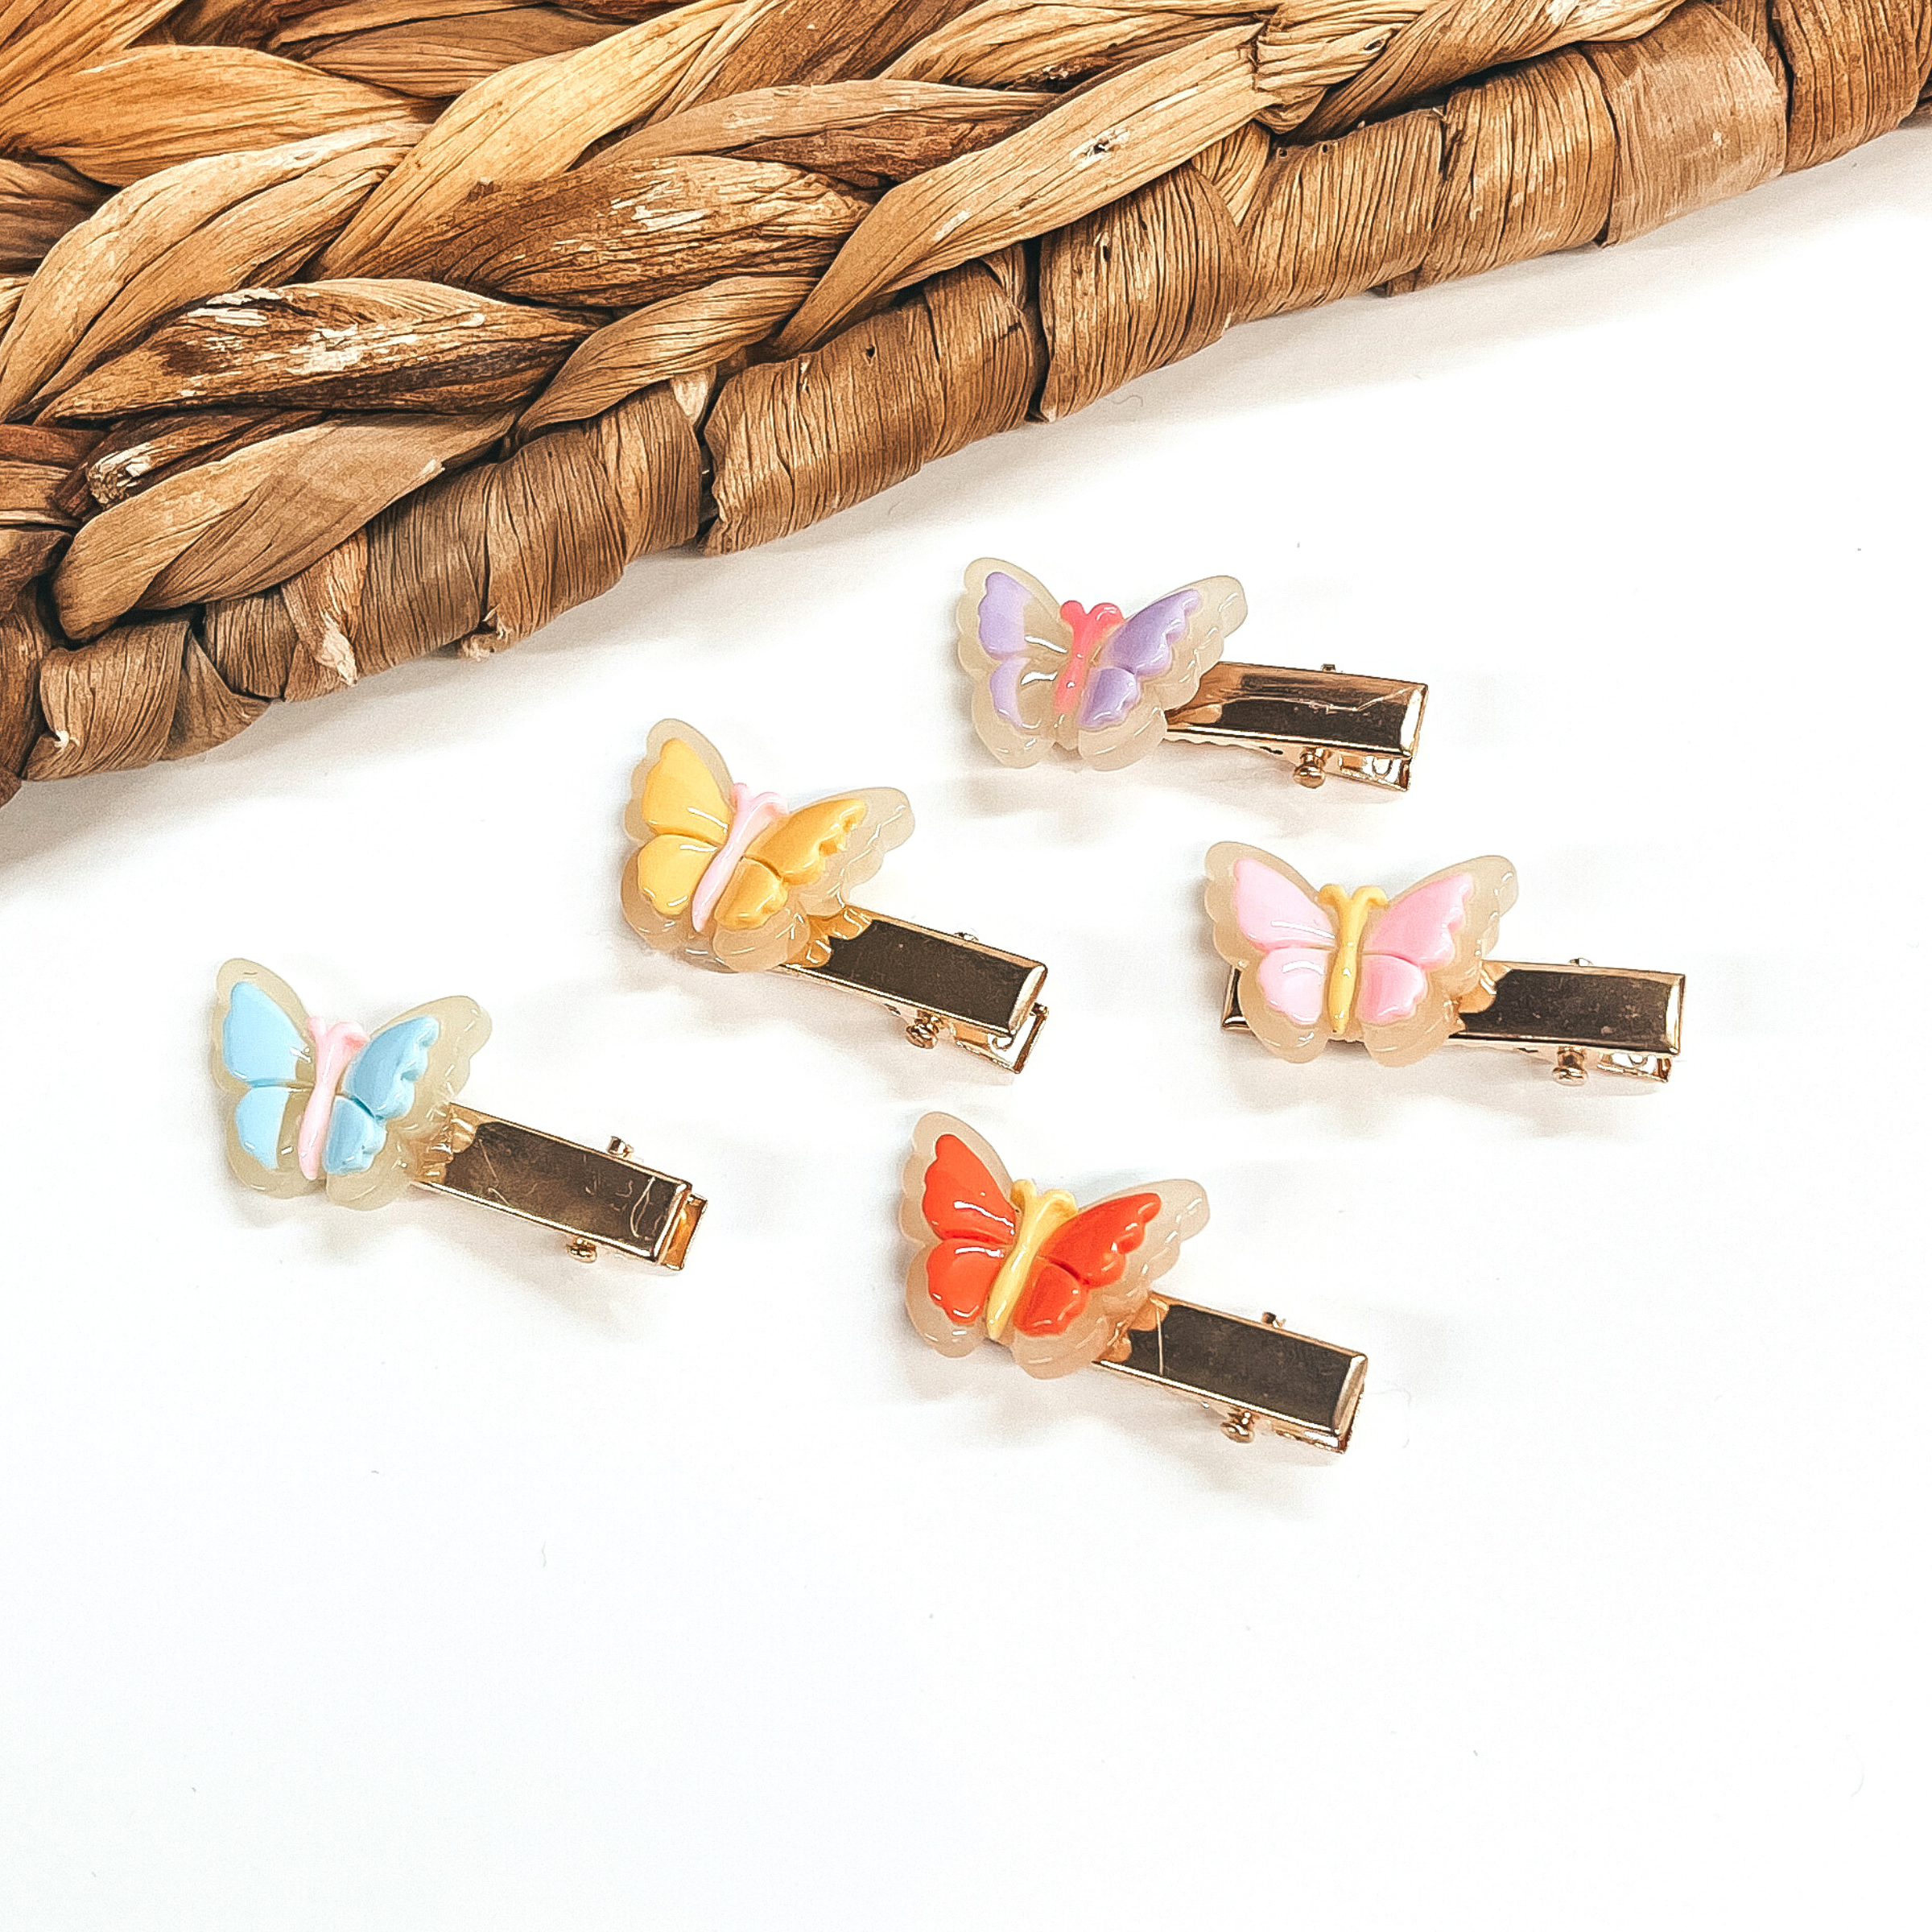 There are five small gold clips with a 3D butterfly charm on them. From left to right;  light blue with light pink body, orange with yellow body, yellow with light pink  body, light pink with yellow body, and light purple with pink body.  These clips are laying on a white background  with a brown woven slate in the back as decor.